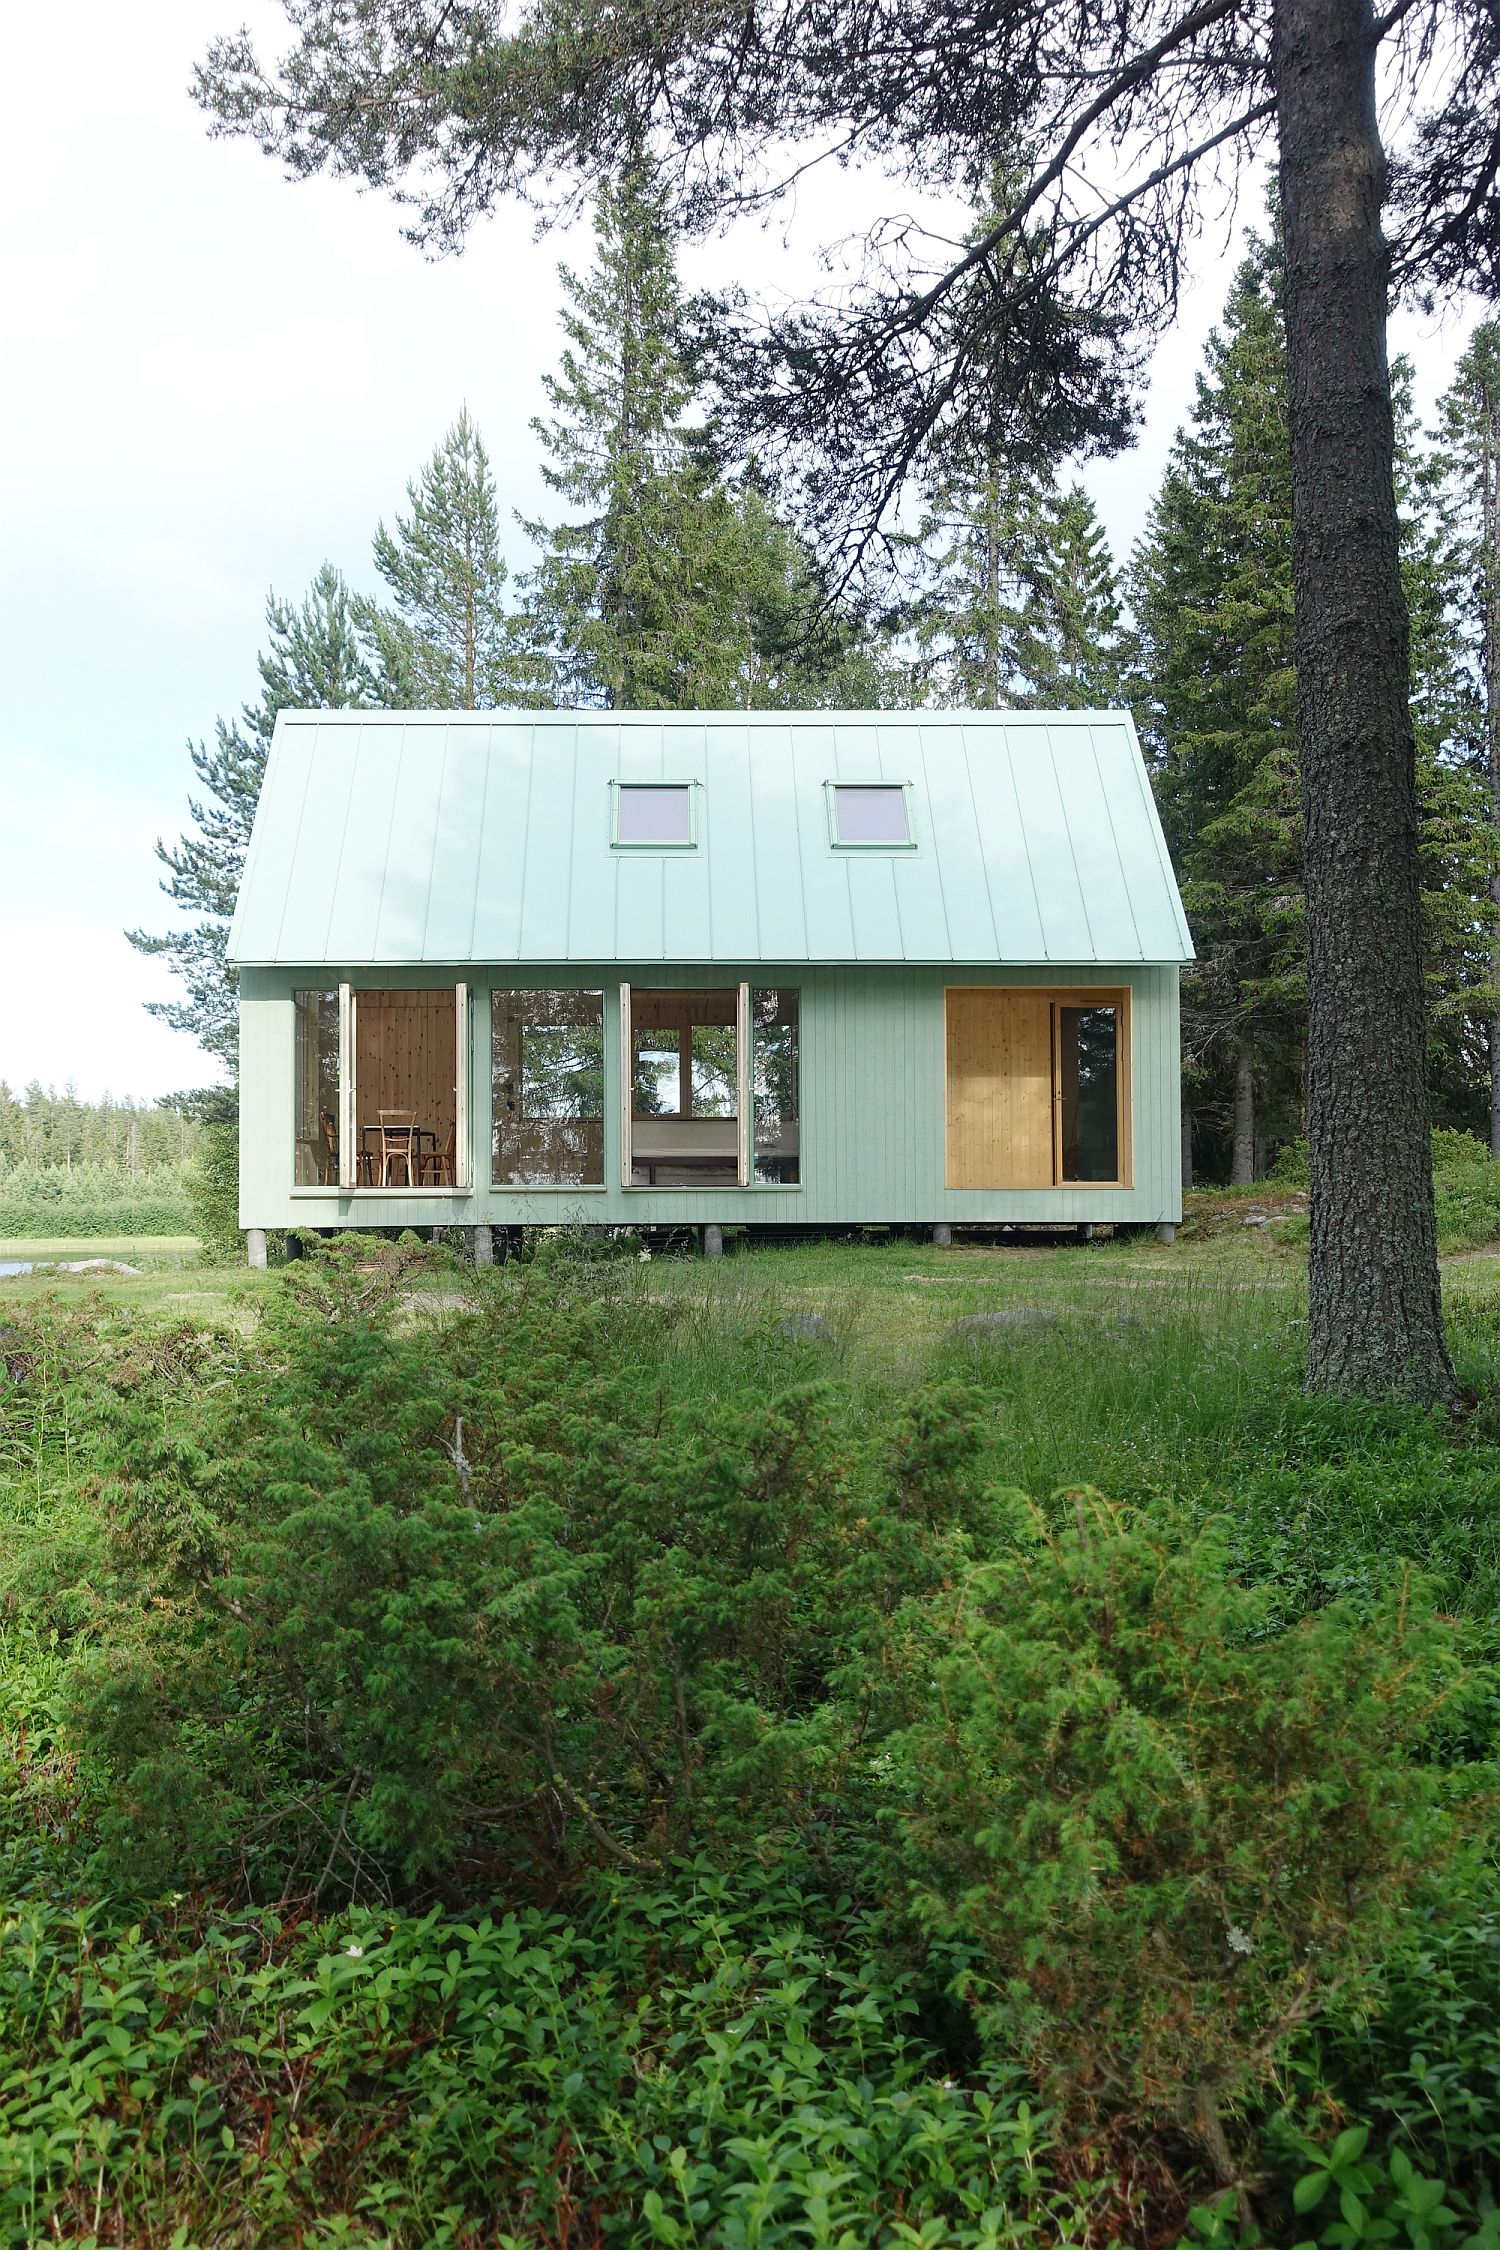 Tall trees and natural greenery surround the cabin on the island